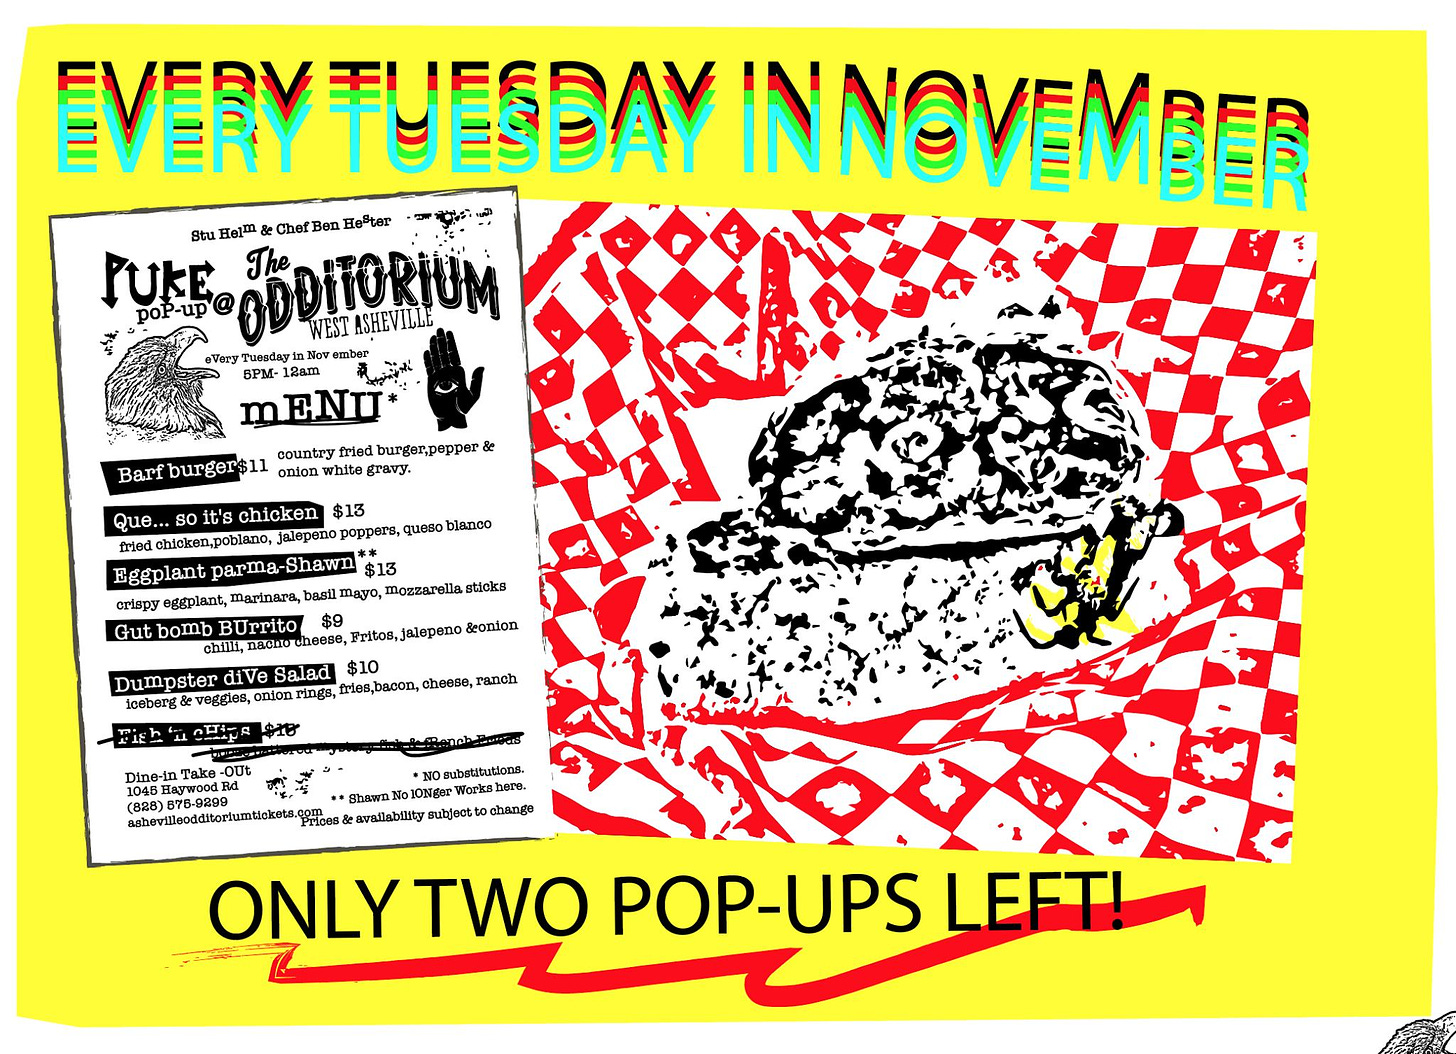 May be an image of text that says 'EVERYTUESDAY INNOVEMBER Stu poP-up EDDITORIUM The Helm Chef ÛHr JUKE WEST ASHEV ILLE eVery Tuesday ember 5PM- 12am burger,pepper& Barf burger$11 onionwhite gravy. Que. chicken $13 chicken,poblano, jalepeno poppers, queso blanco Eggplant -Shawn marinara basil crispy mozzarella sticks BUrrito chilli,n diVe veggies, Fritos, jalepeno &onion iceberg $10 ries,bacon, ranch *NOsubstitutions. shevilleodditoriumtickets. Prices availability subject change ONLY TWO POP POP-UPS LEFT!'